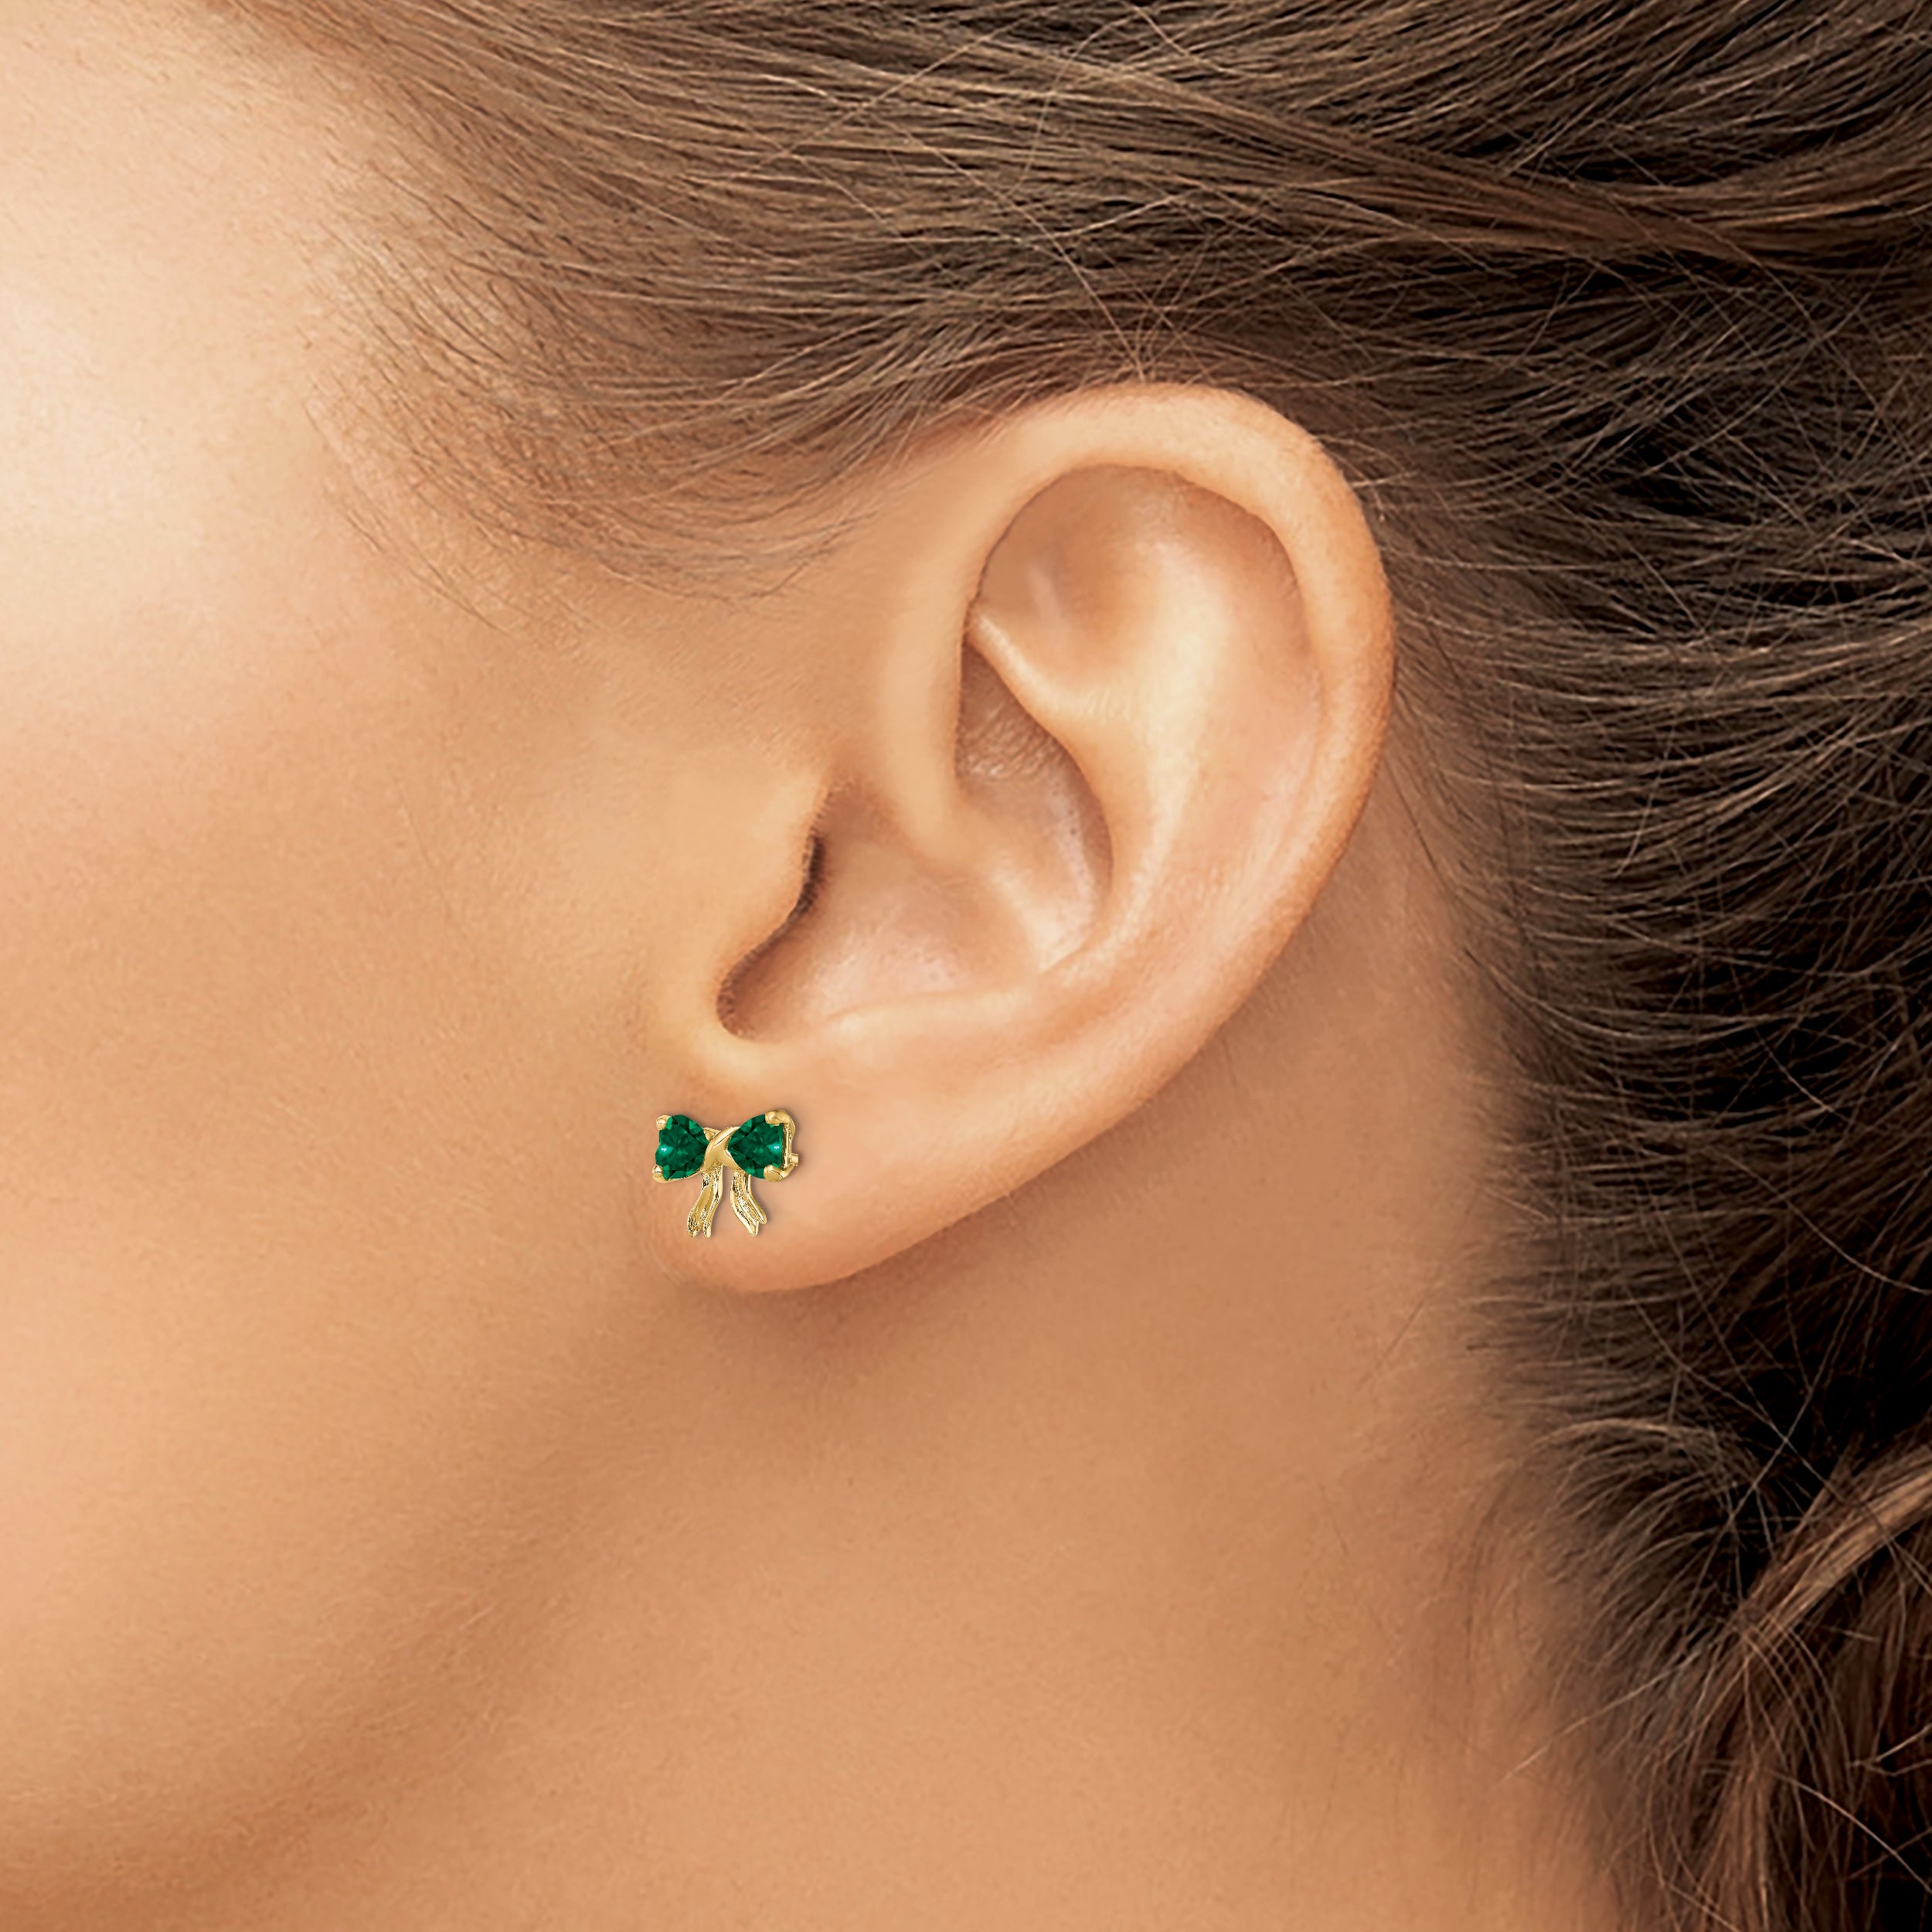 14k Gold Polished Created Emerald Bow Post Earrings